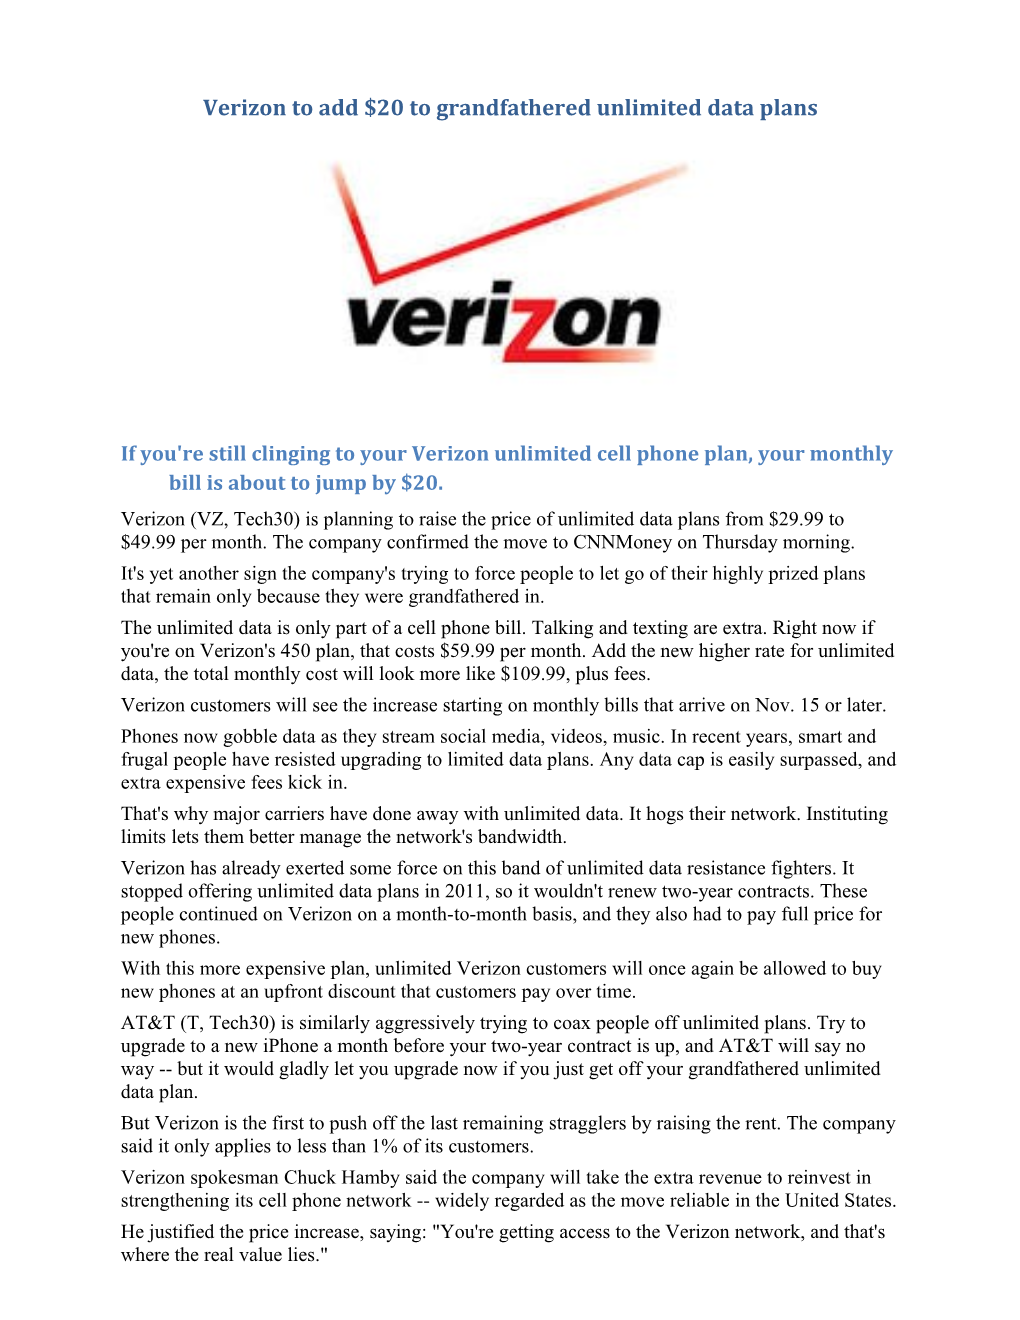 Verizon to Add $20 to Grandfathered Unlimited Data Plans